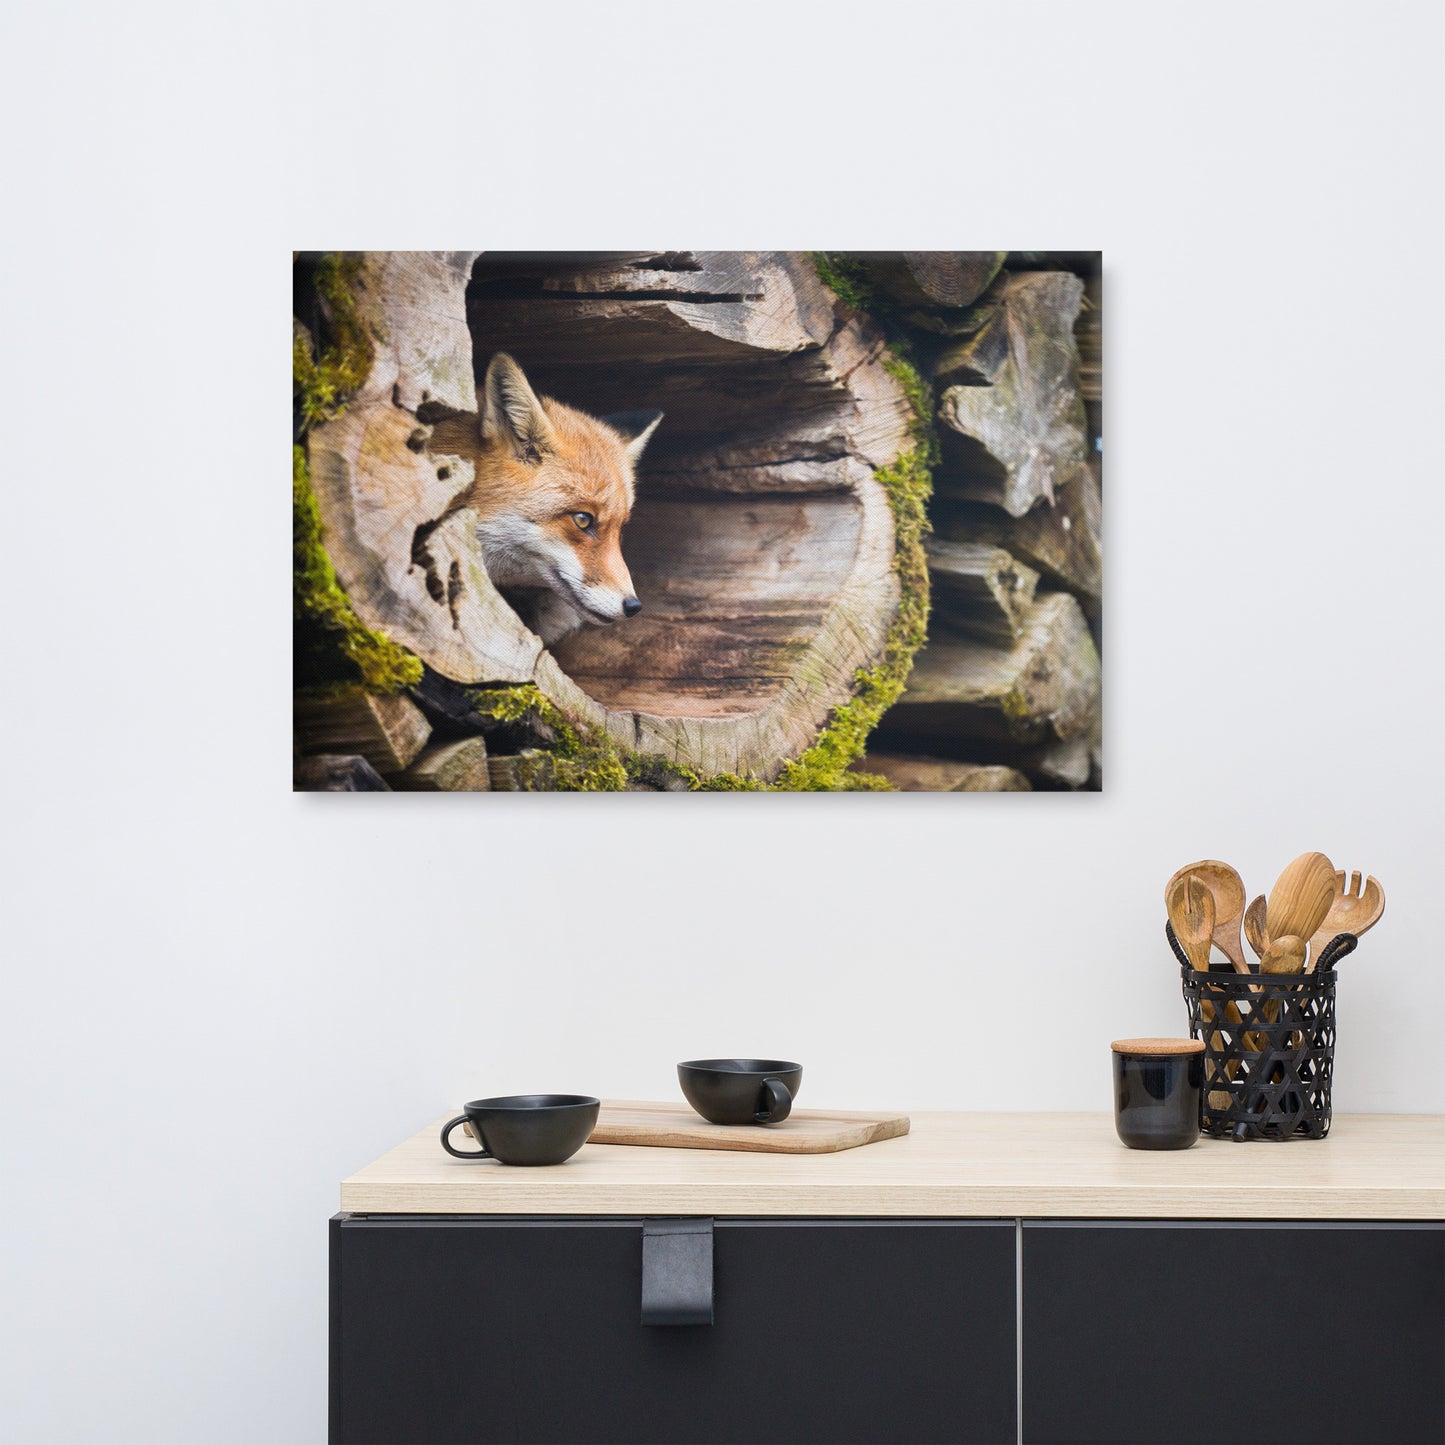 Young Red Fox Face In Mossy Stump Animal Wildlife Nature Photograph Canvas Wall Art Prints